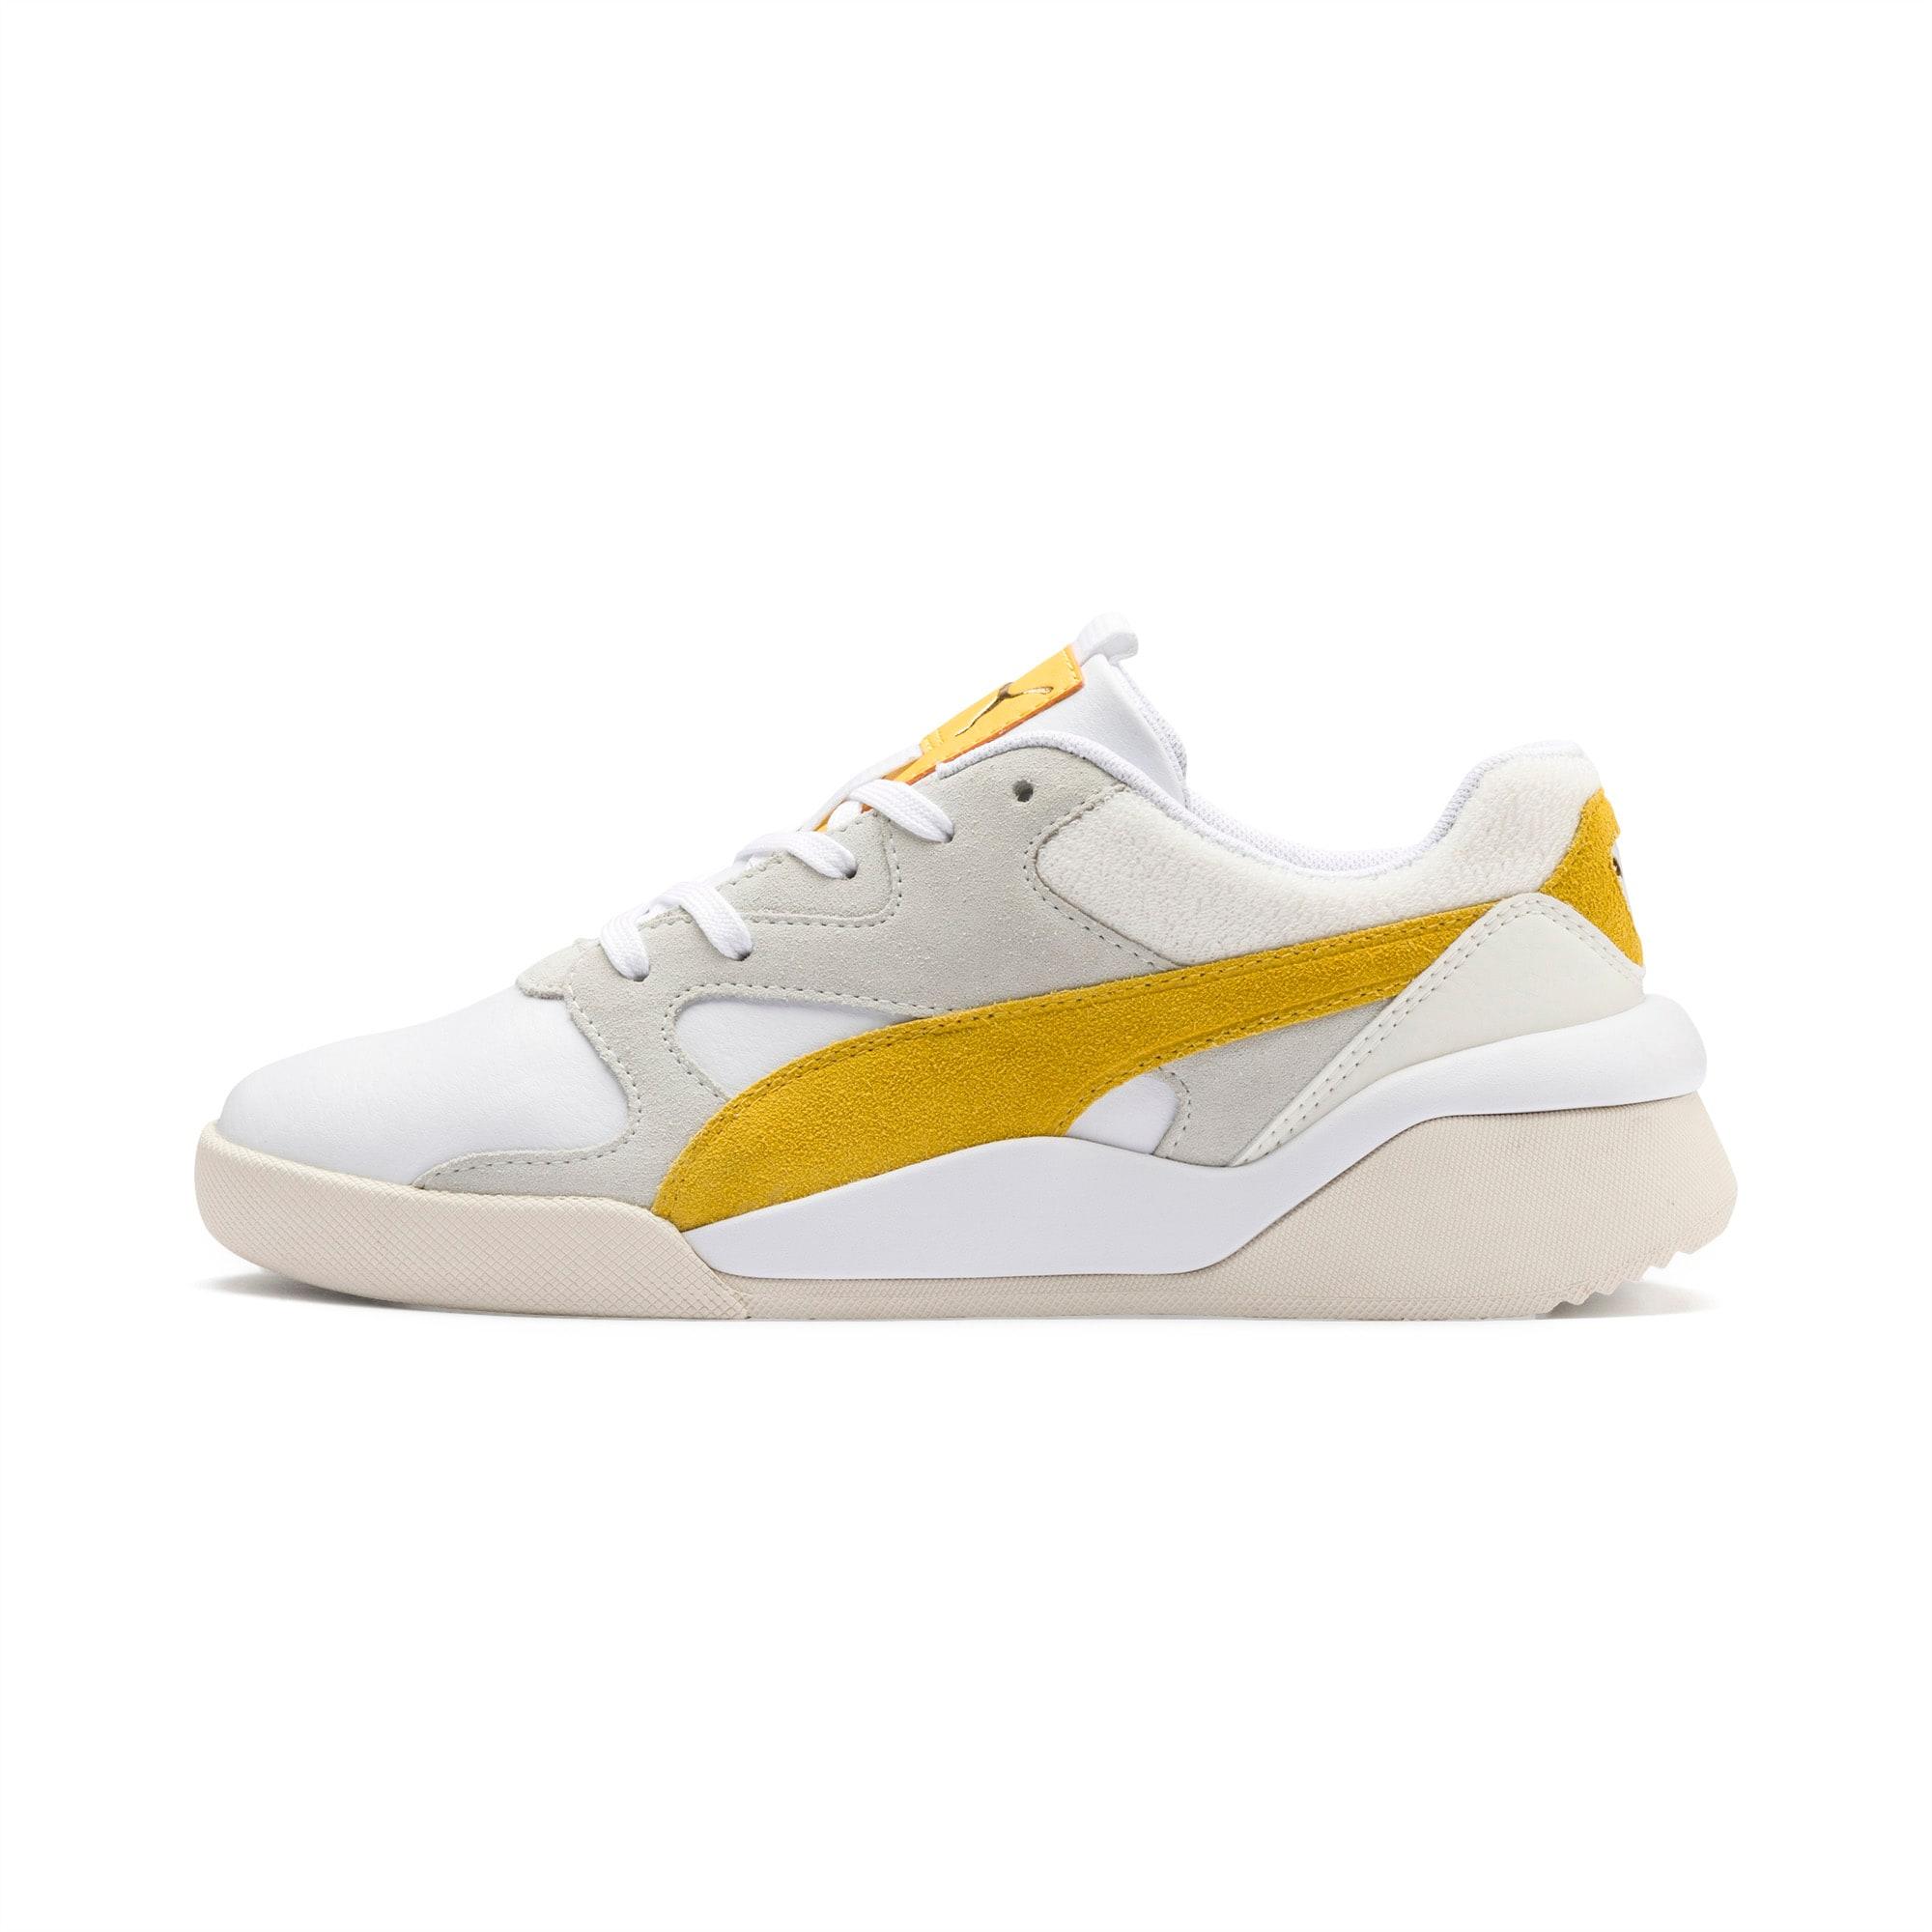 PUMA Aeon Heritage Wn's Trainers in White - Save 55% - Lyst